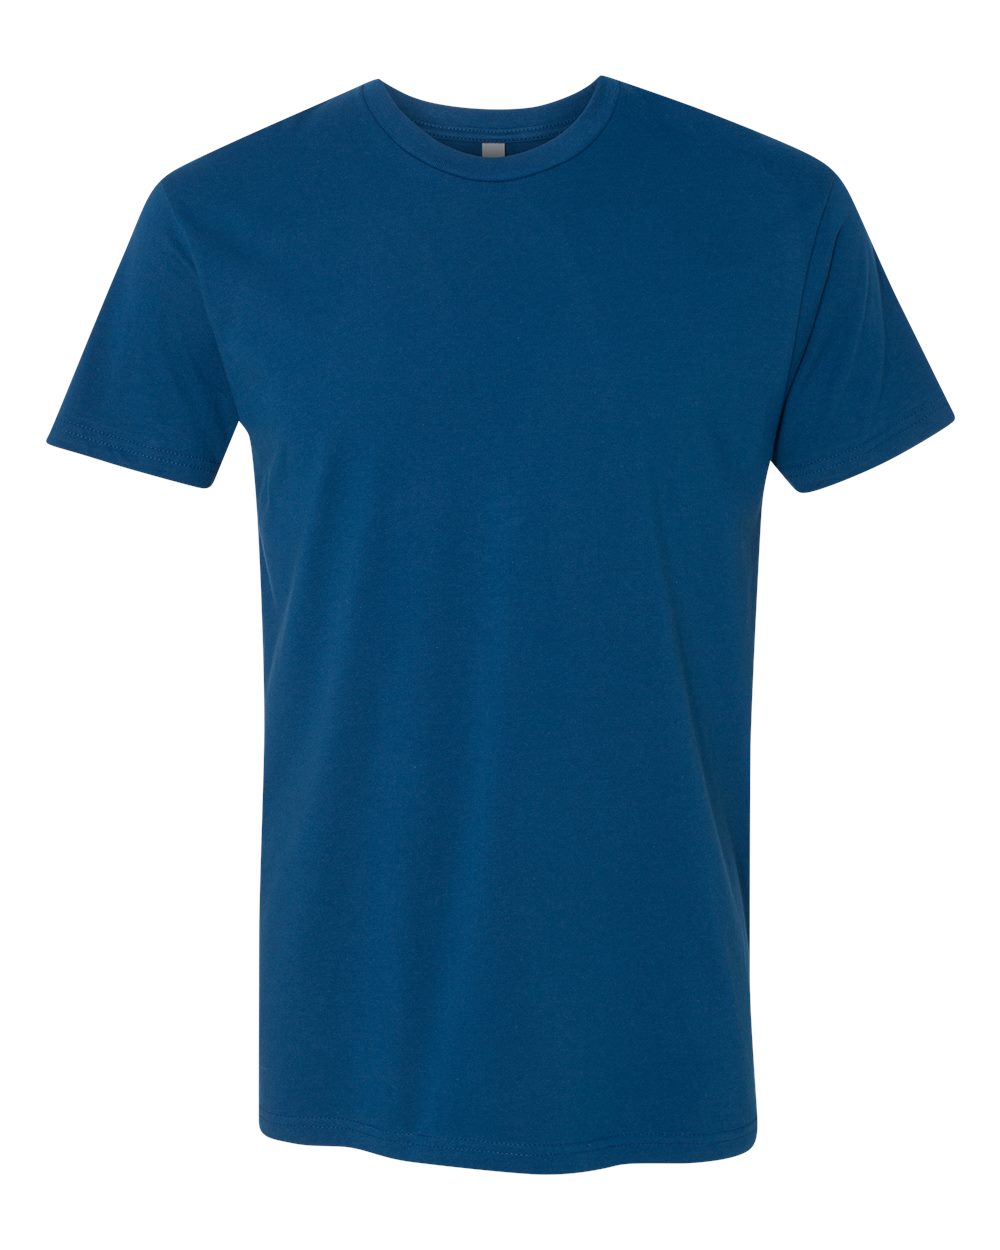 Next Level Tee 3600 - Cool Blue